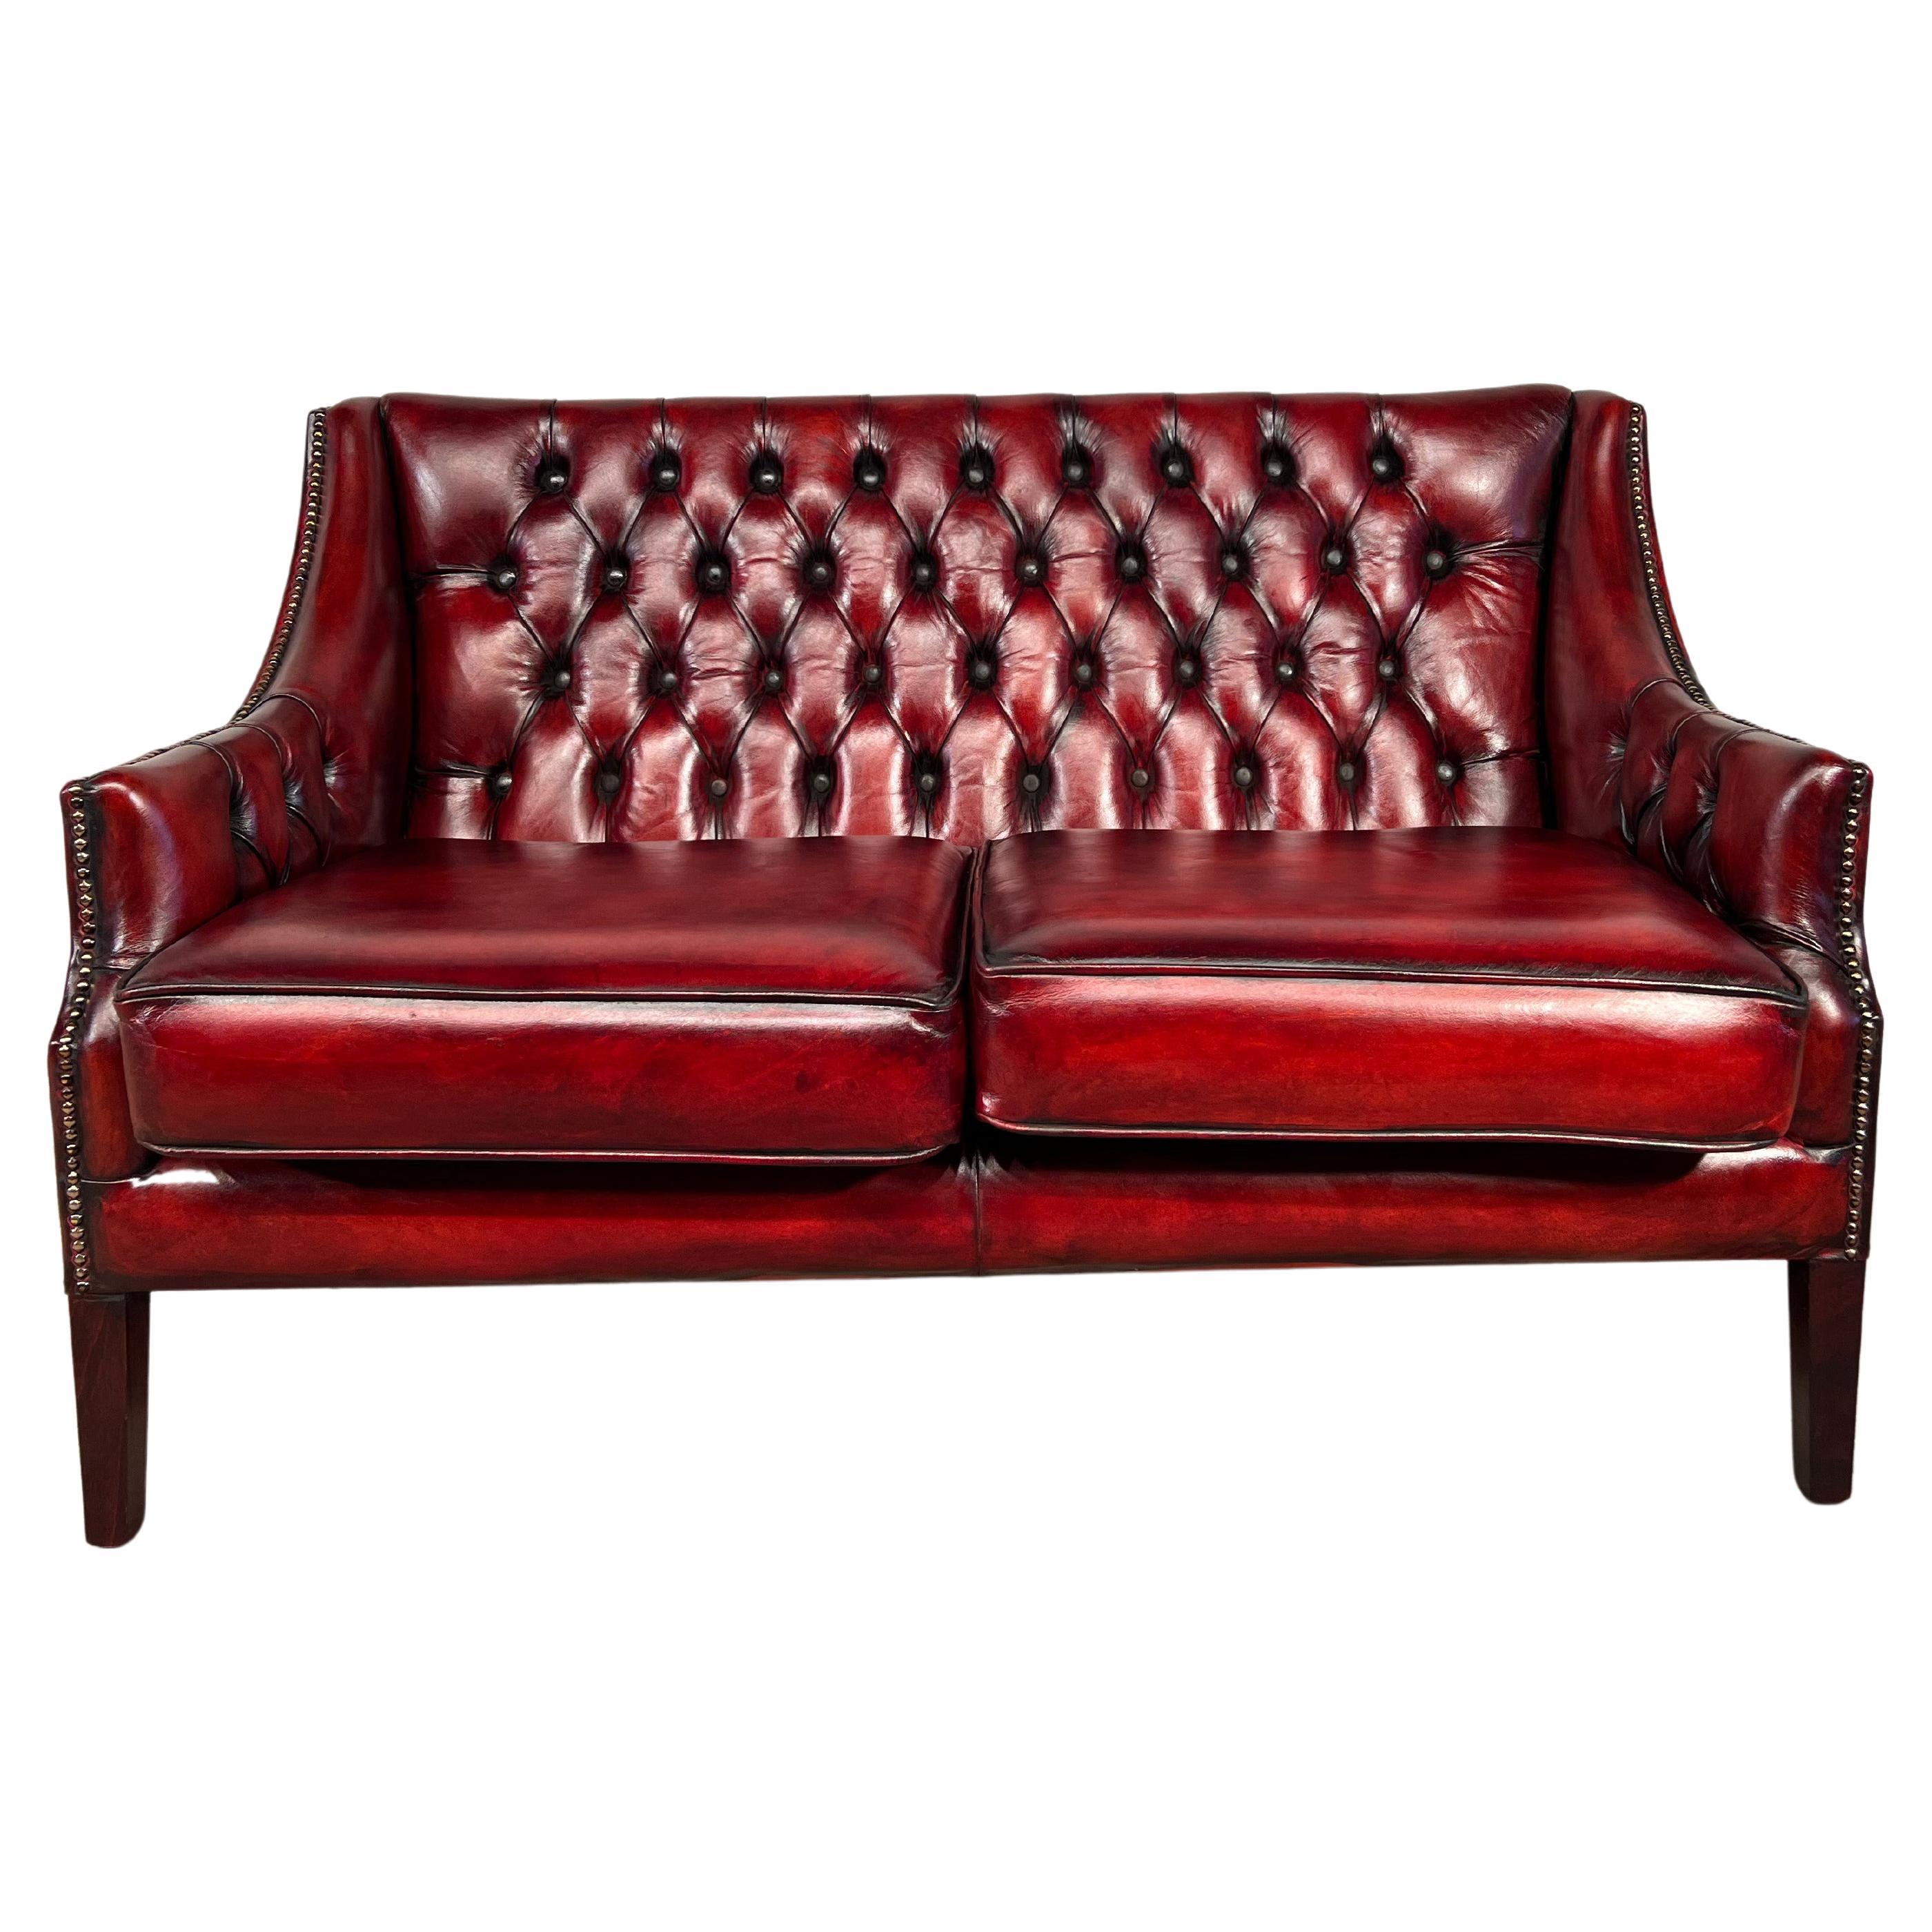 A Neat Mid C English Made Two Seater Chesterfield Sofa Hand dyed Deep Red #495 For Sale